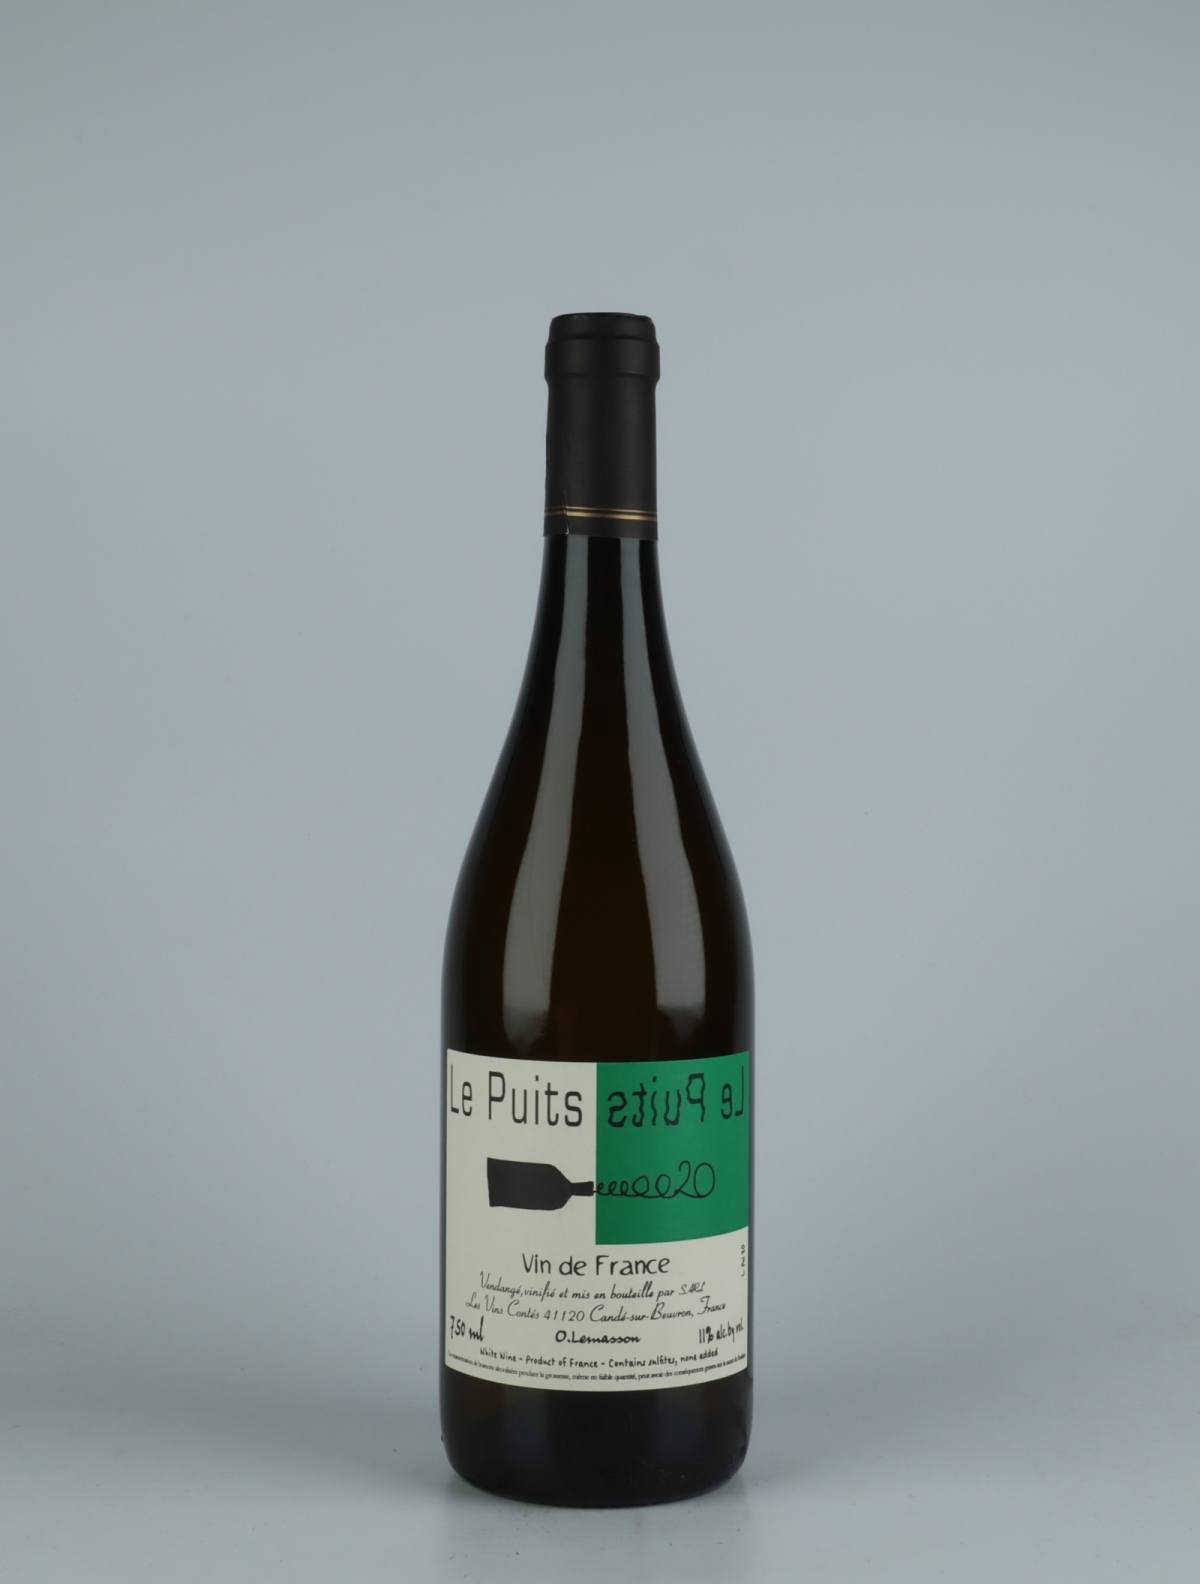 A bottle 2020 Le Puits White wine from Olivier Lemasson, Loire in France